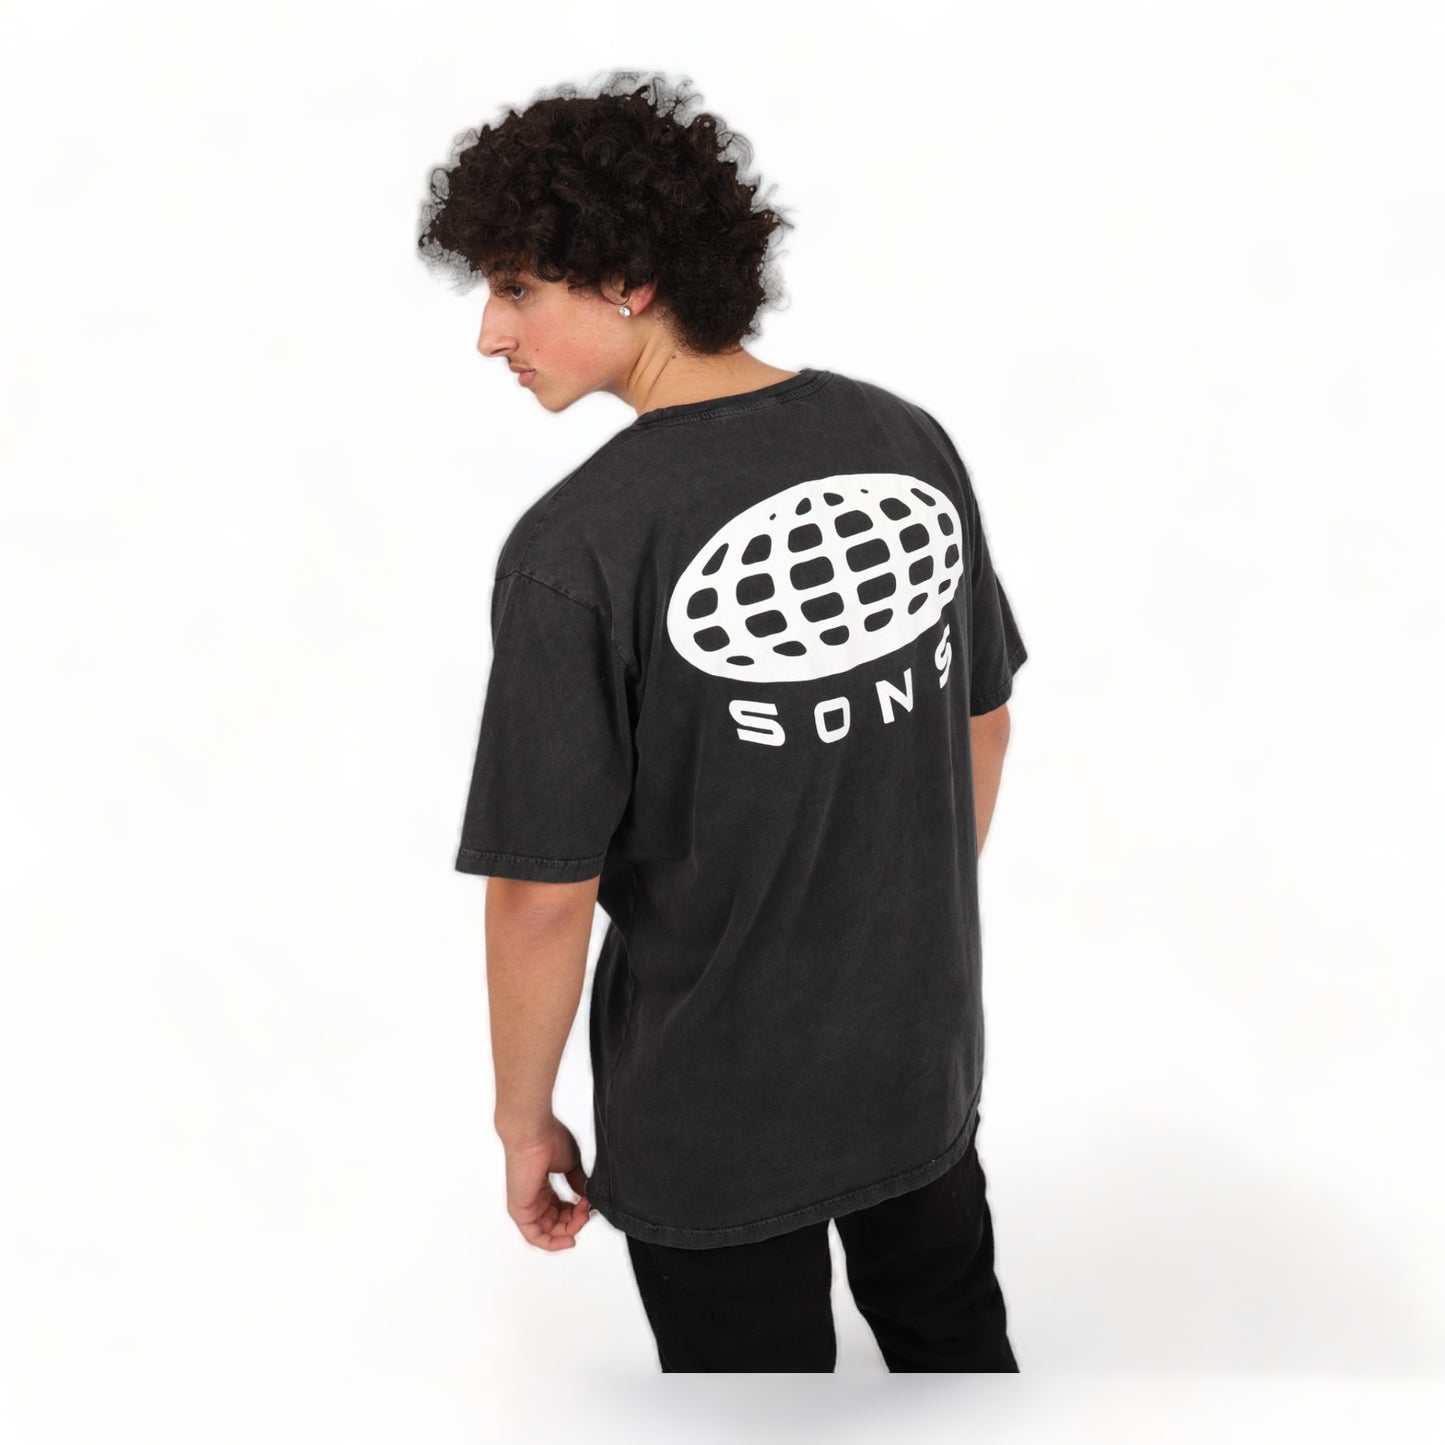 PRIMO THE BRAND SONS T-SHIRT